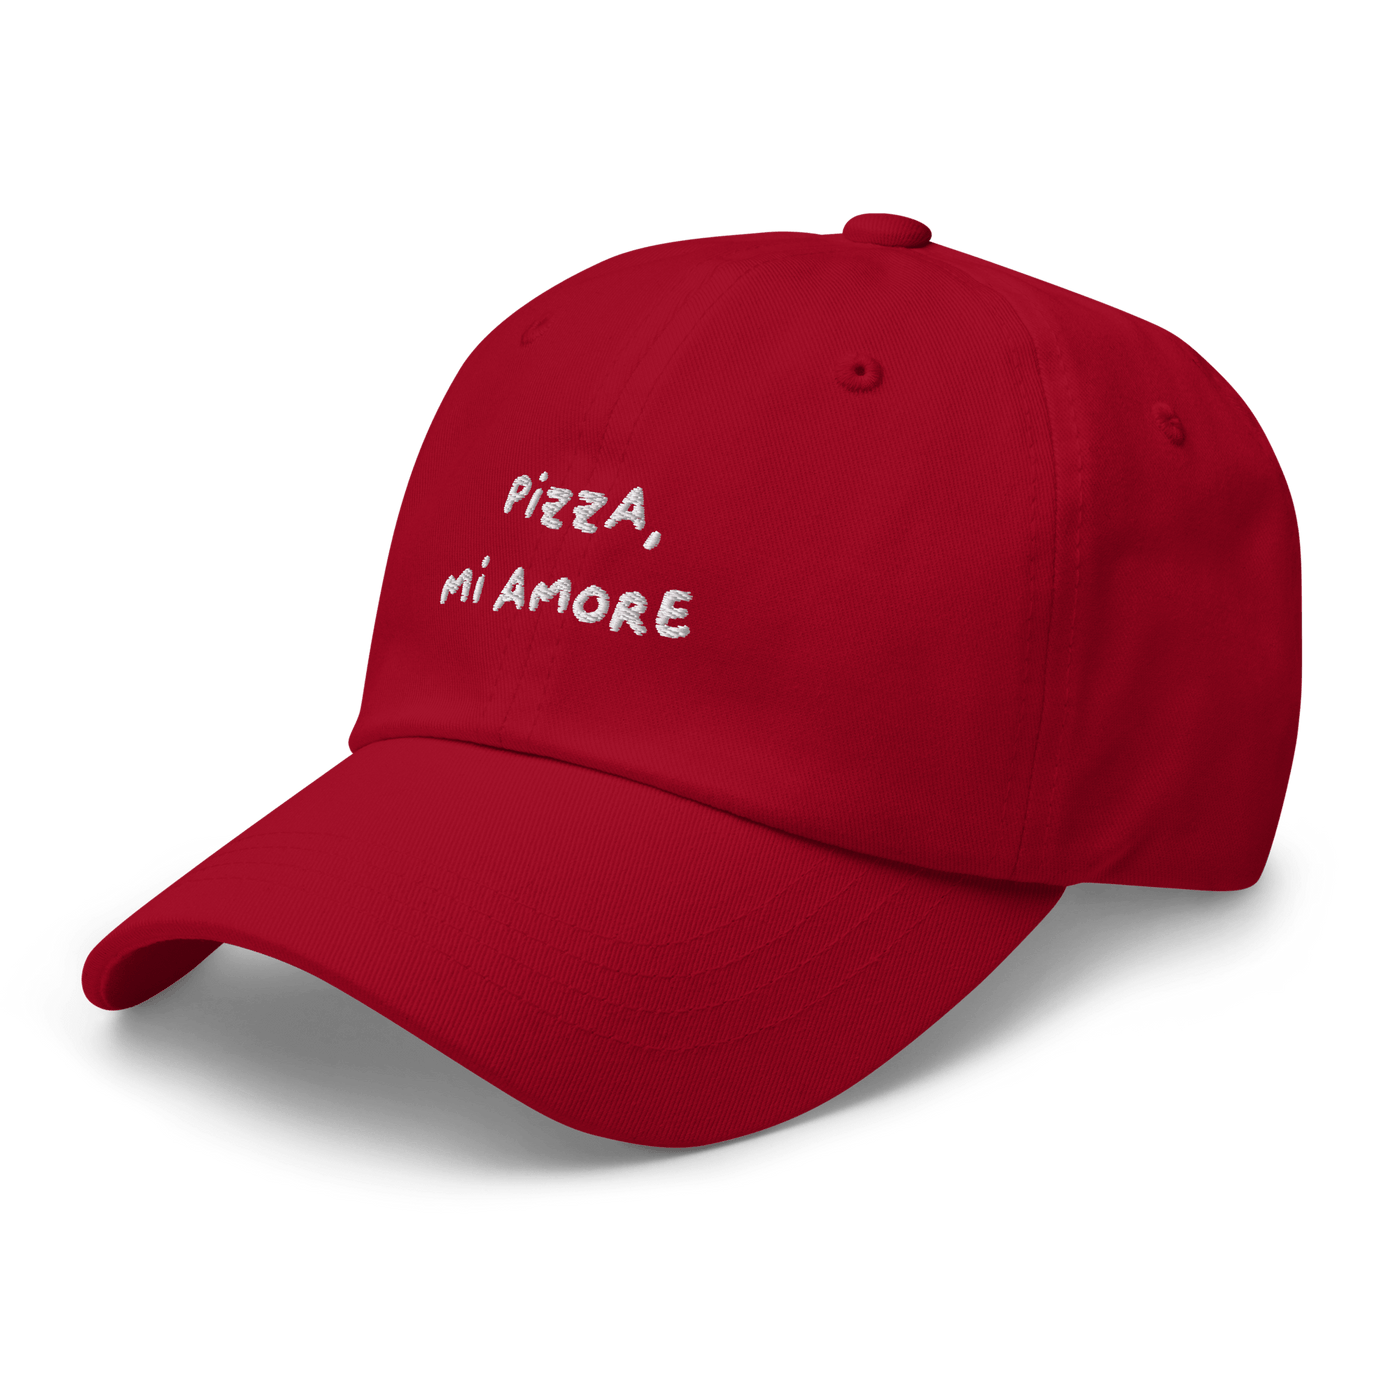 Pizza Mi Amore Dad hat - Navy - - Just Another Cap Store